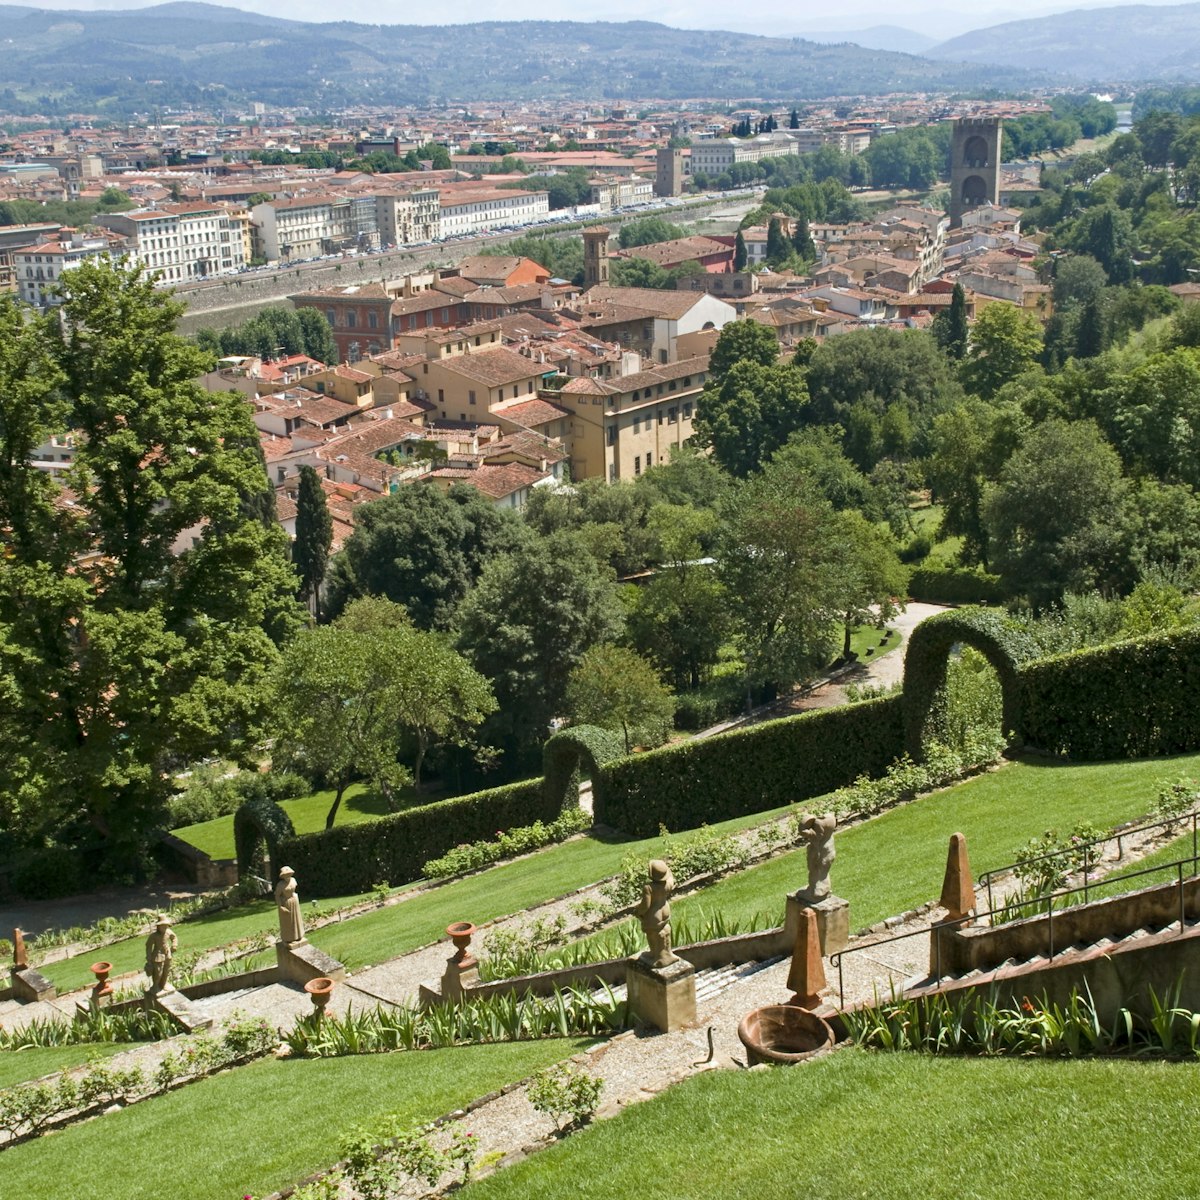 Panoramic view over River Arno and Florence from the Bardini Gardens, Florence (Firenze), Tuscany, Italy, Europe